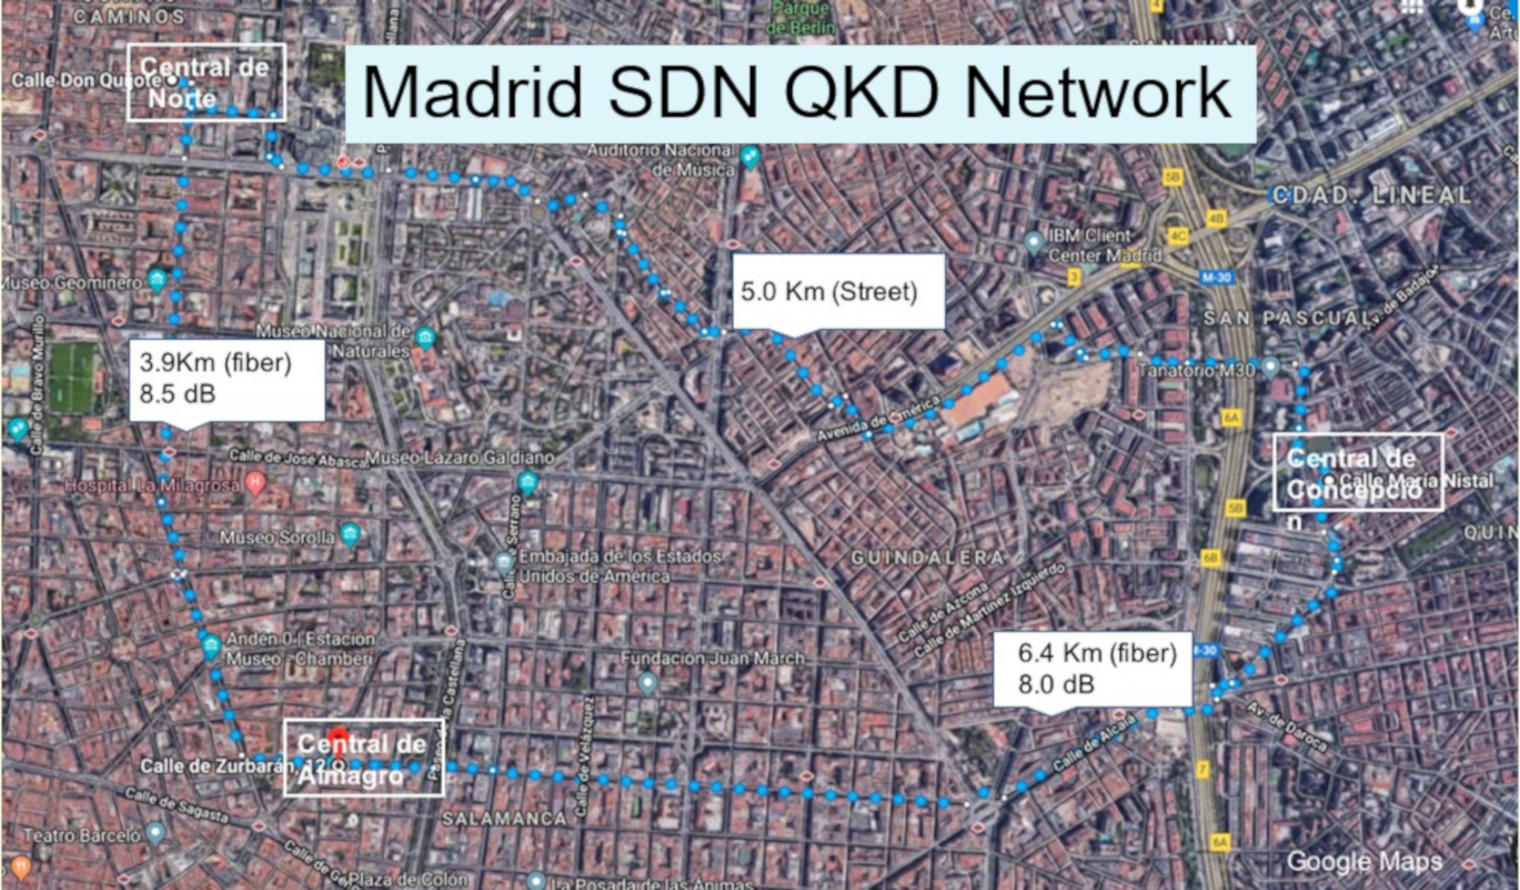 First SDN-QKD Network 4.